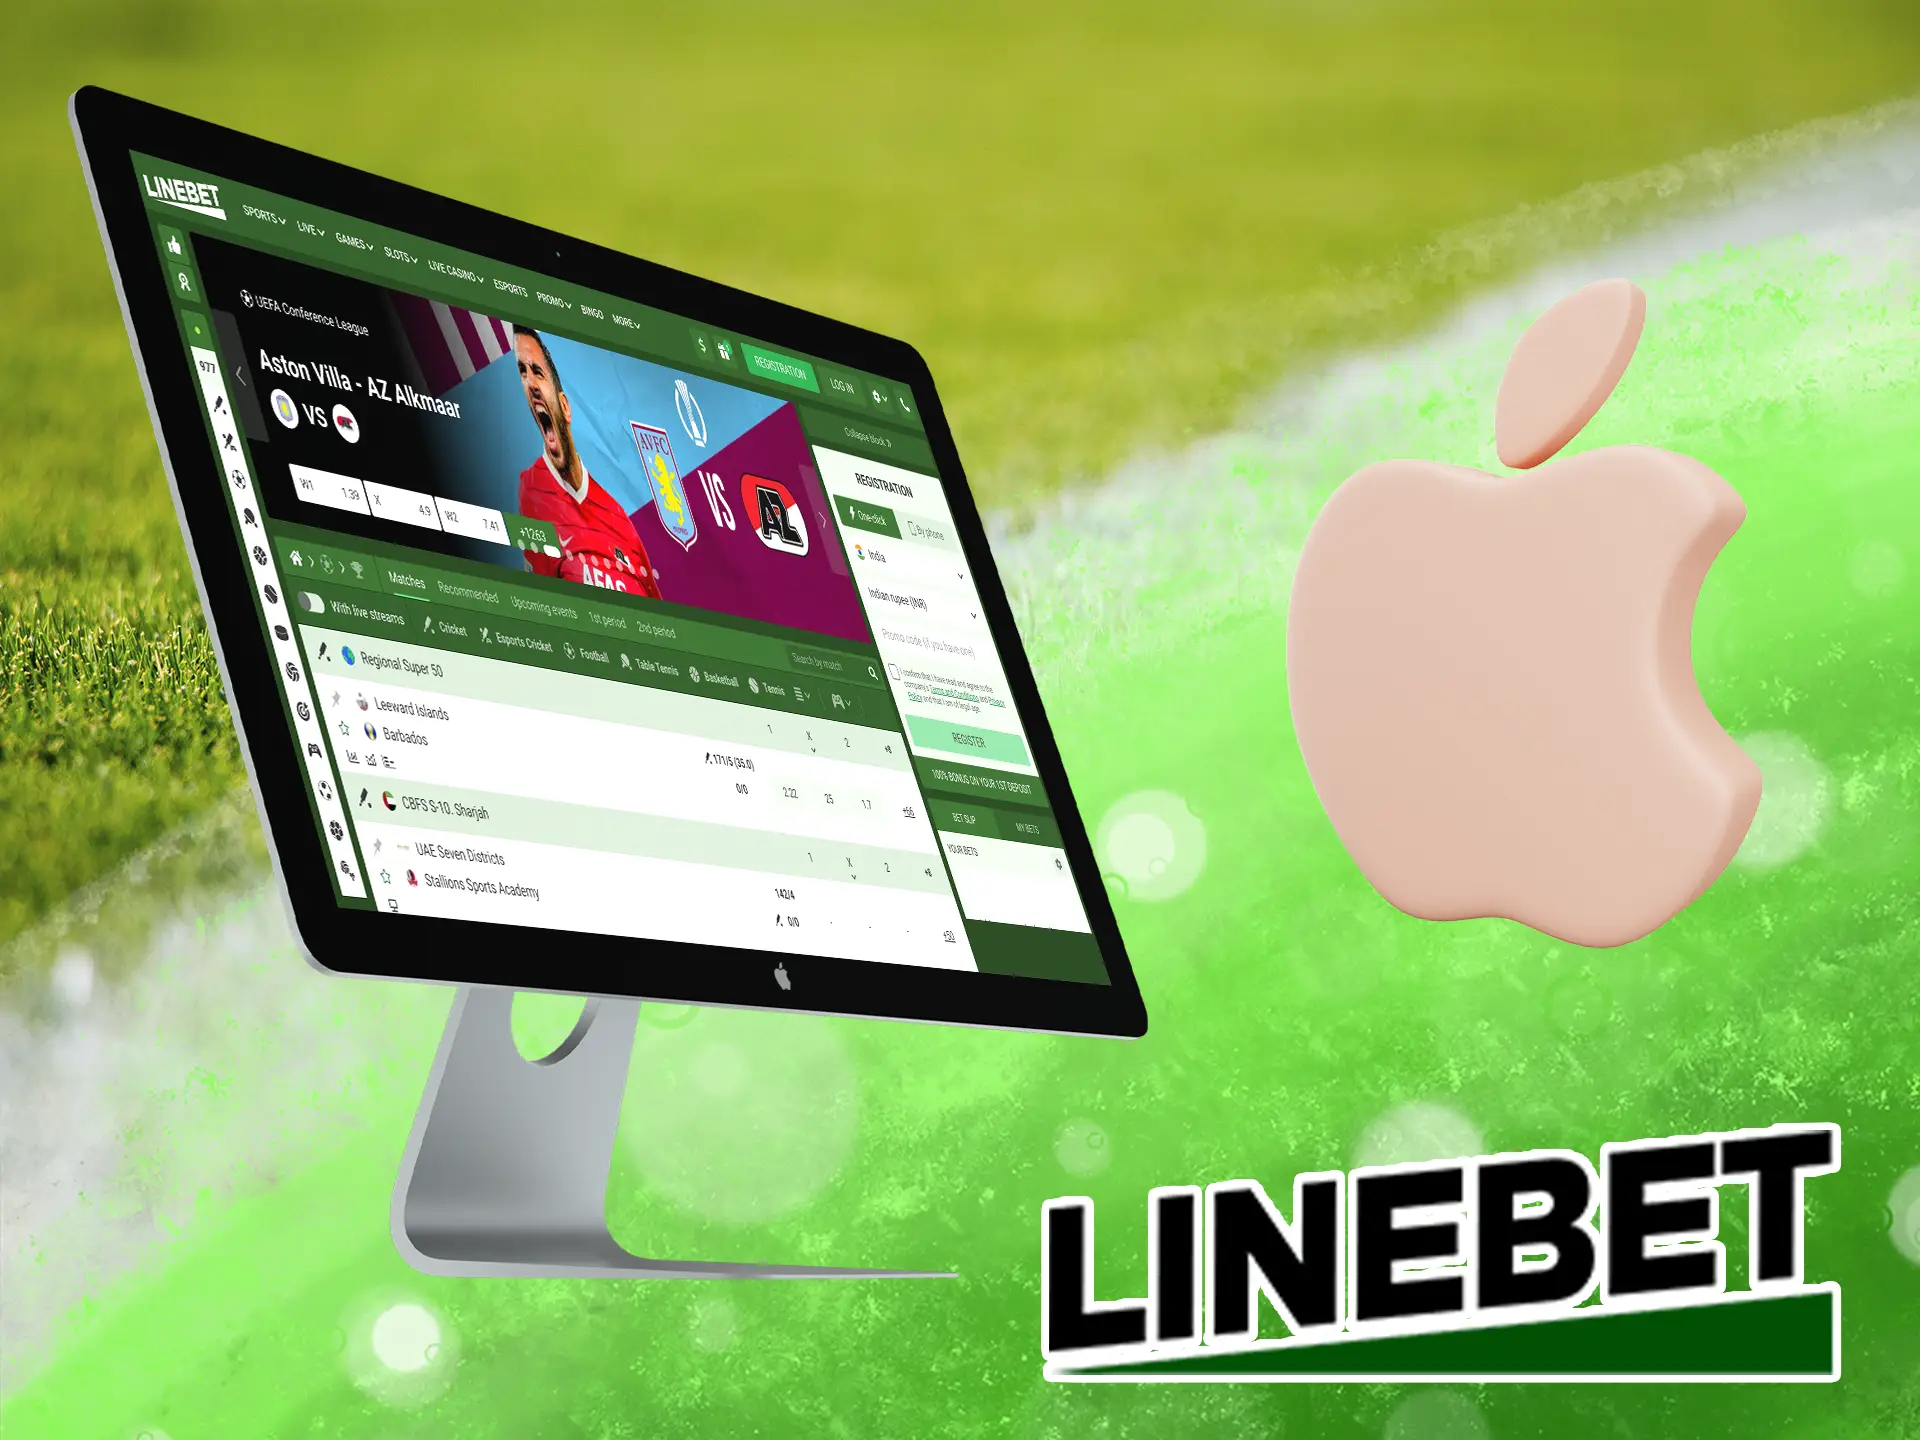 In order to make it easier to work on the MacOs platform, Linebet has developed a special software to enjoy the game.